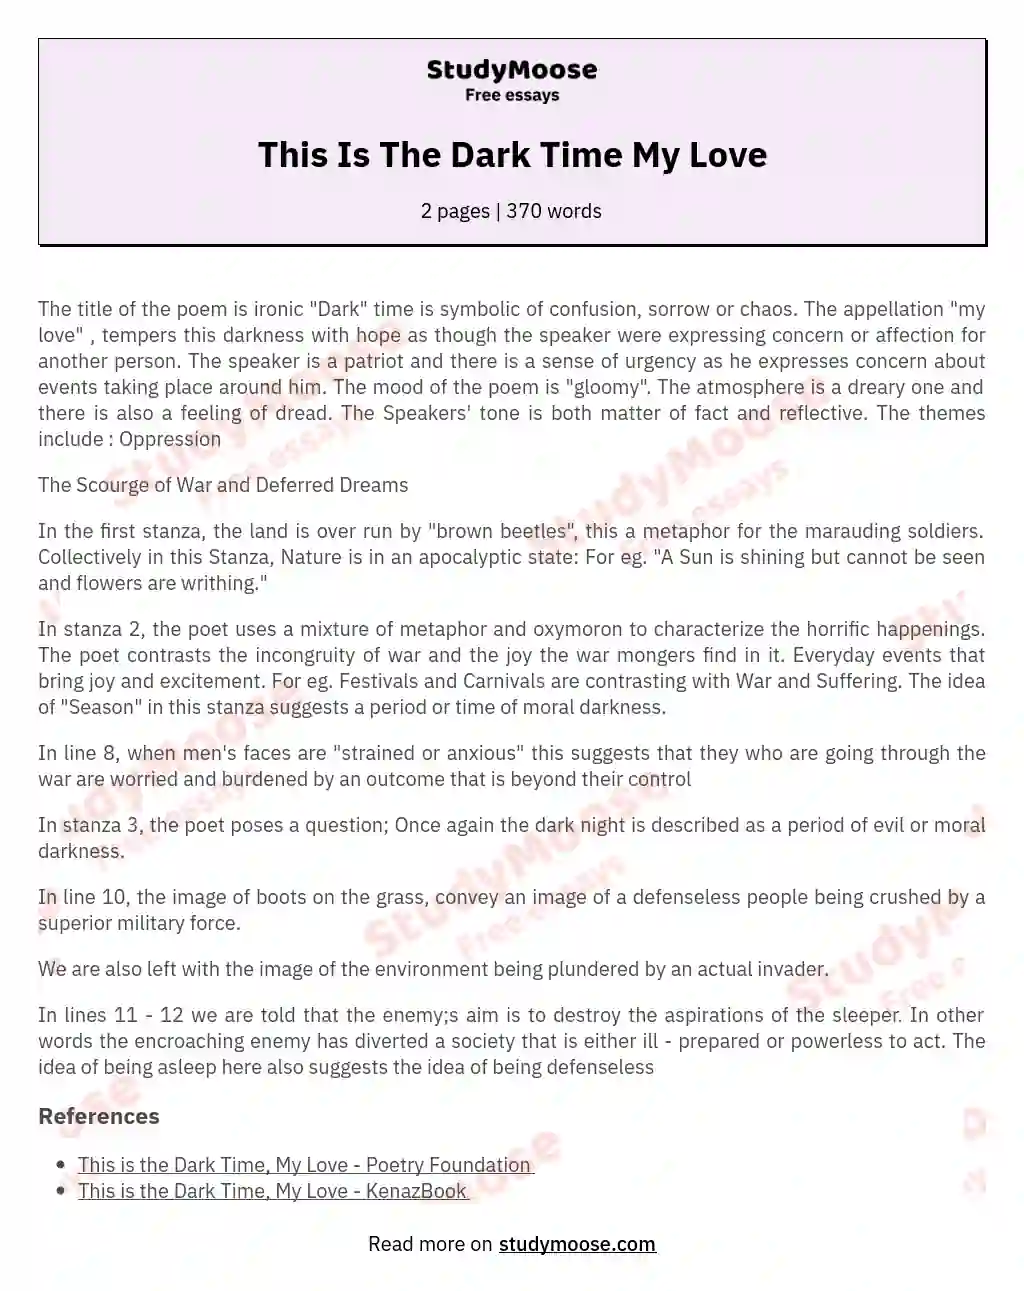 This Is The Dark Time My Love essay